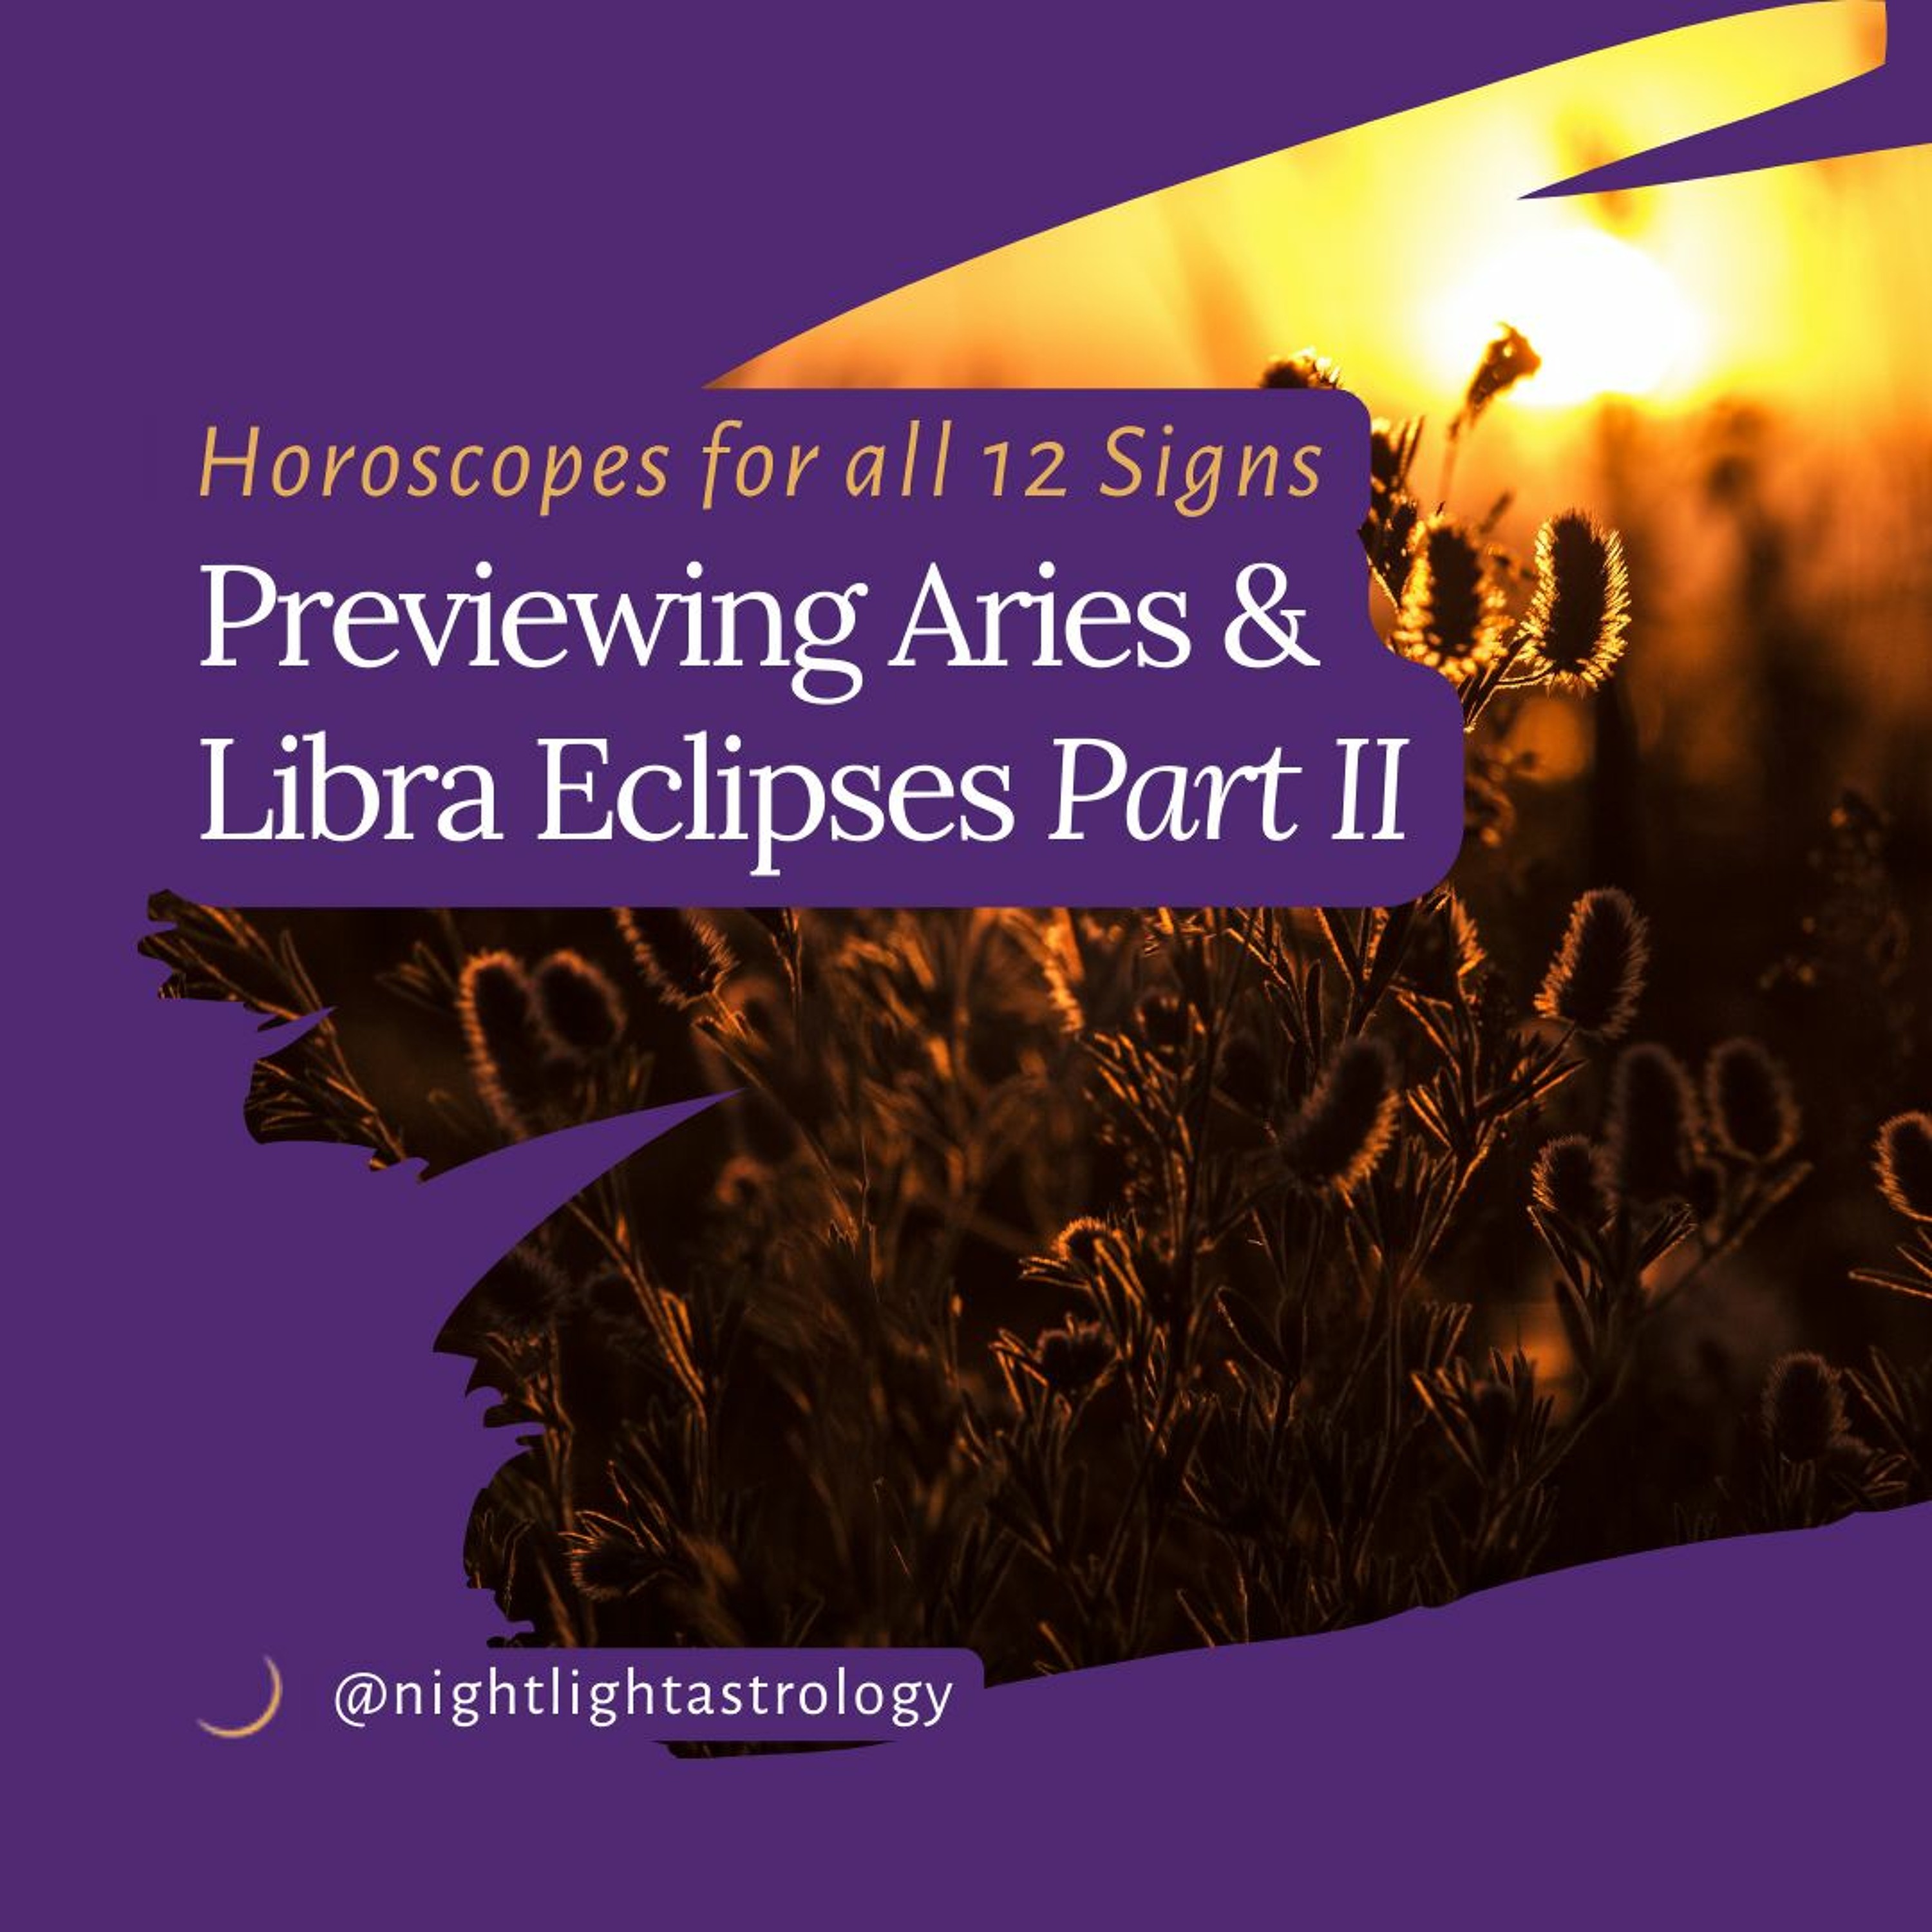 Previewing Aries and Libra Eclipses Part II Horoscopes for all 12